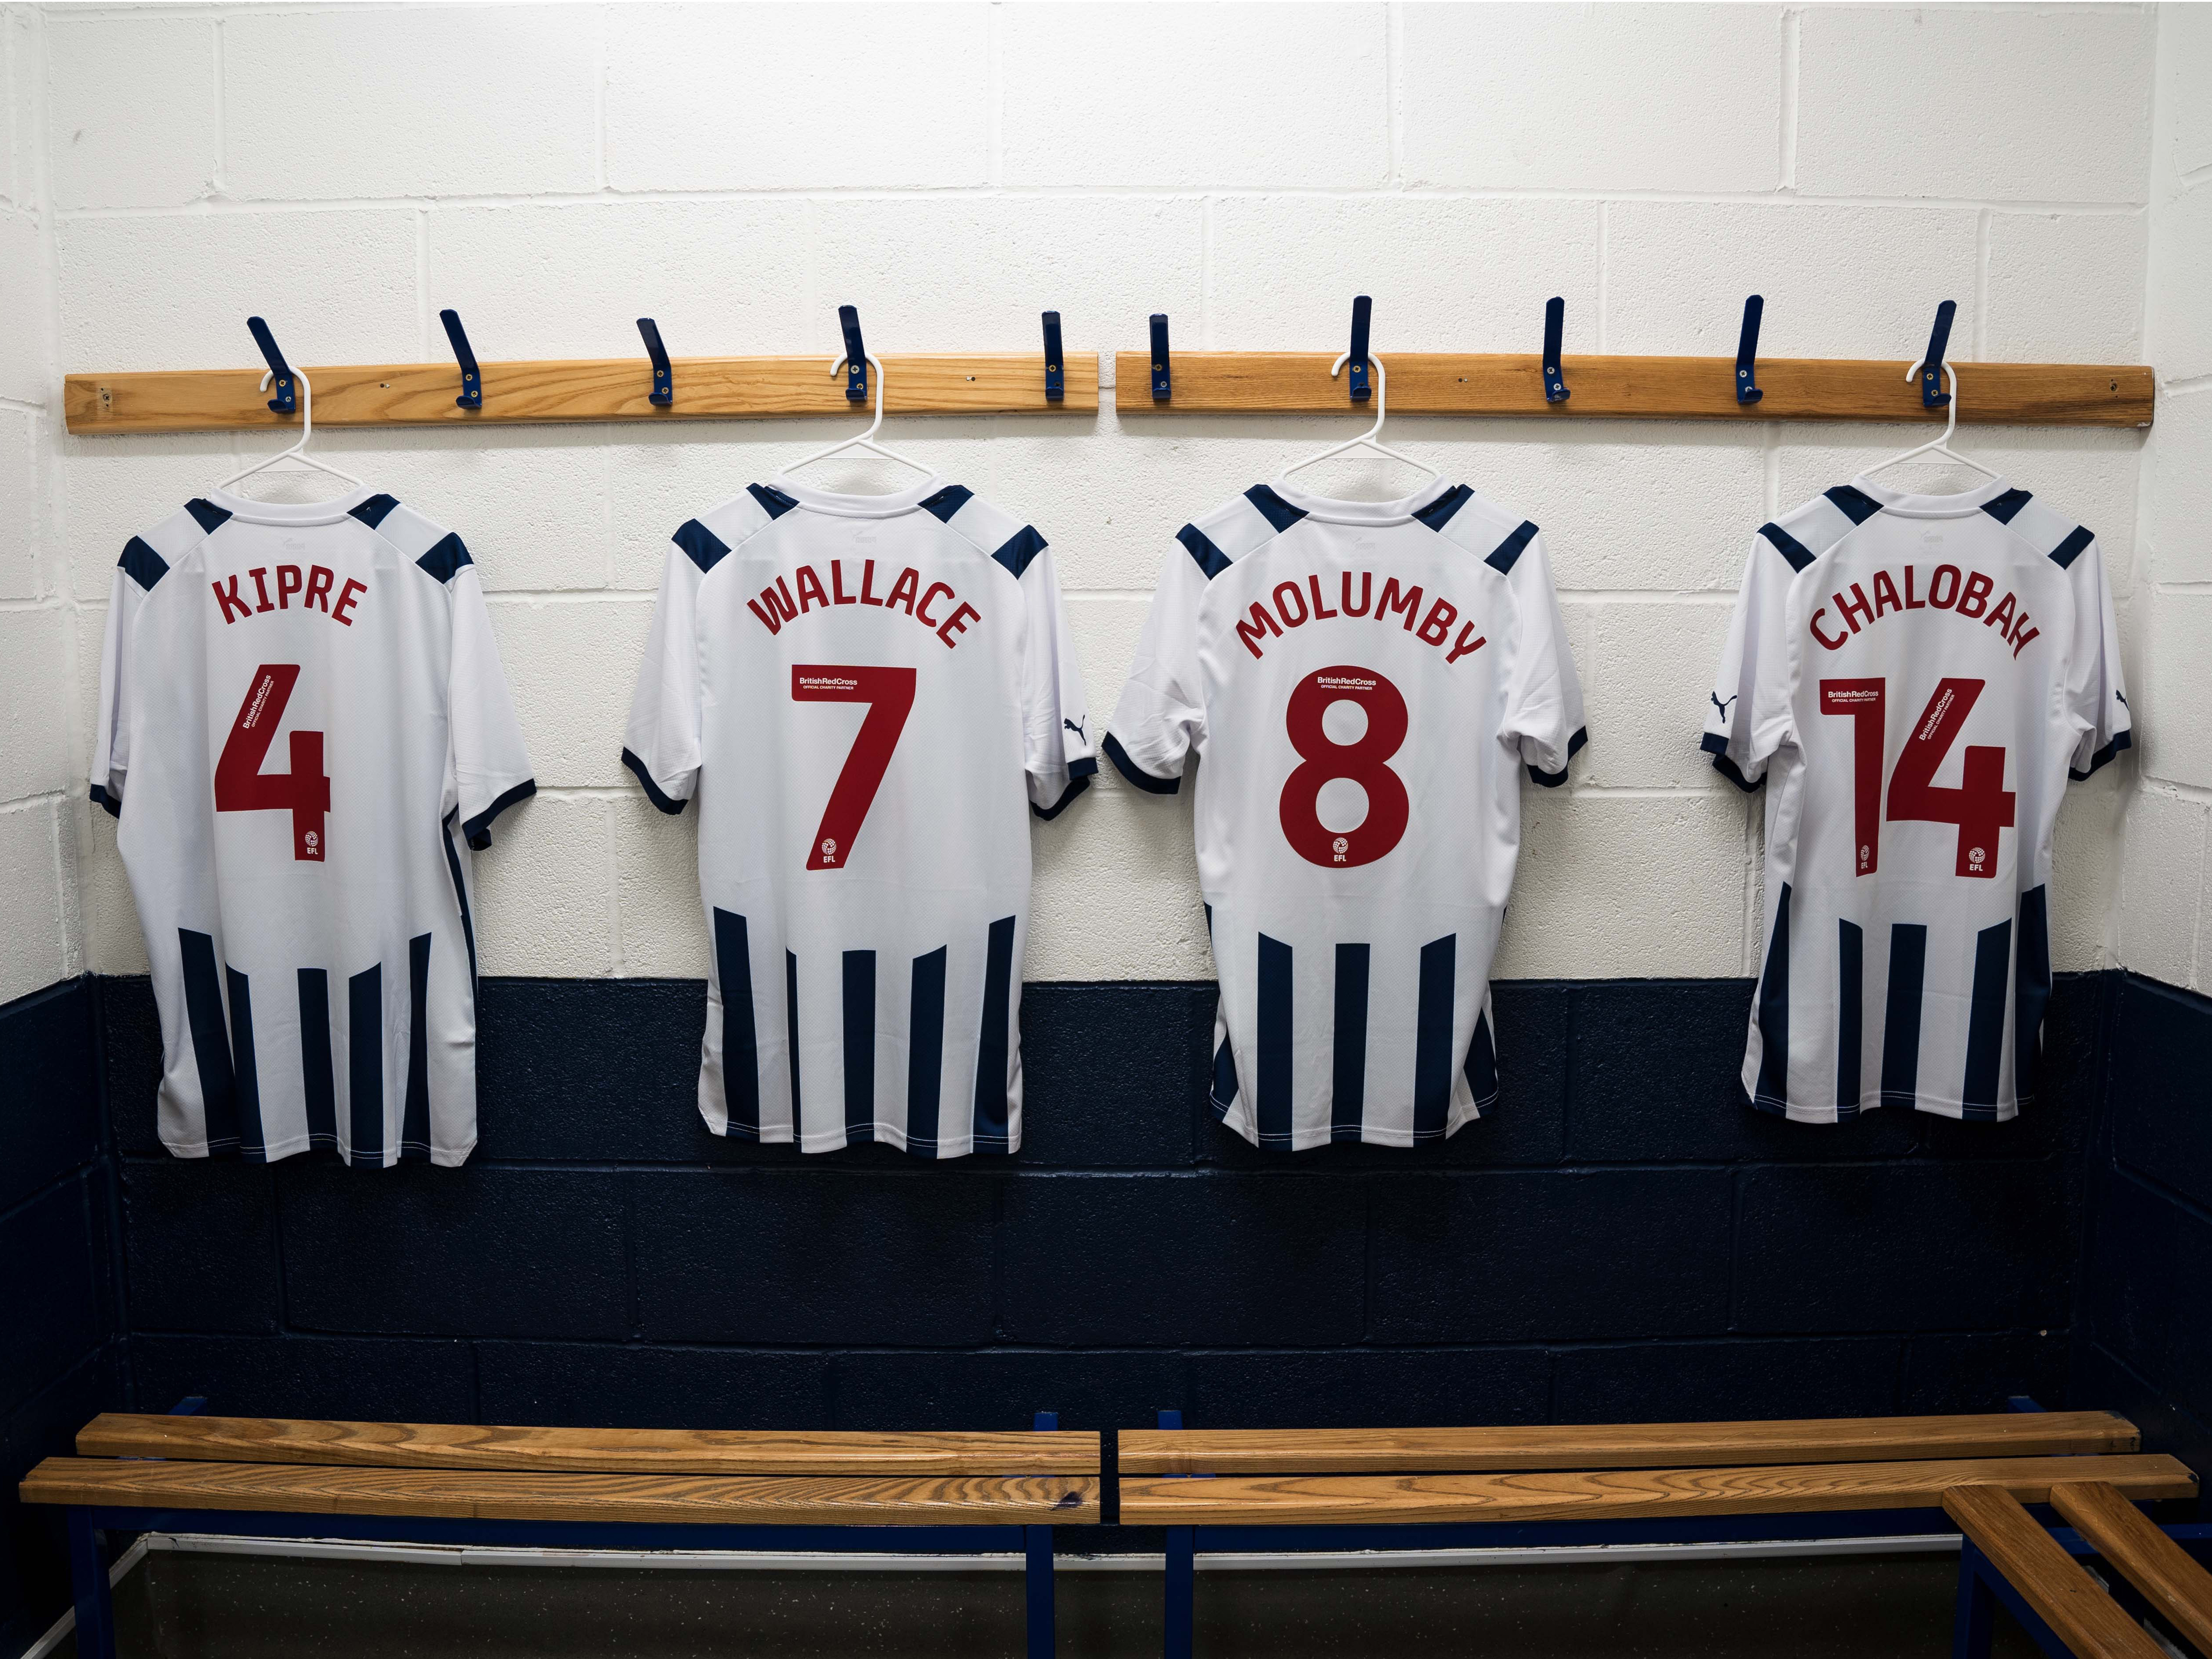 An image showing Albion's new squad numbers for Kipre (4), Wallace (7), Molumby (8) and Chalobah (14)